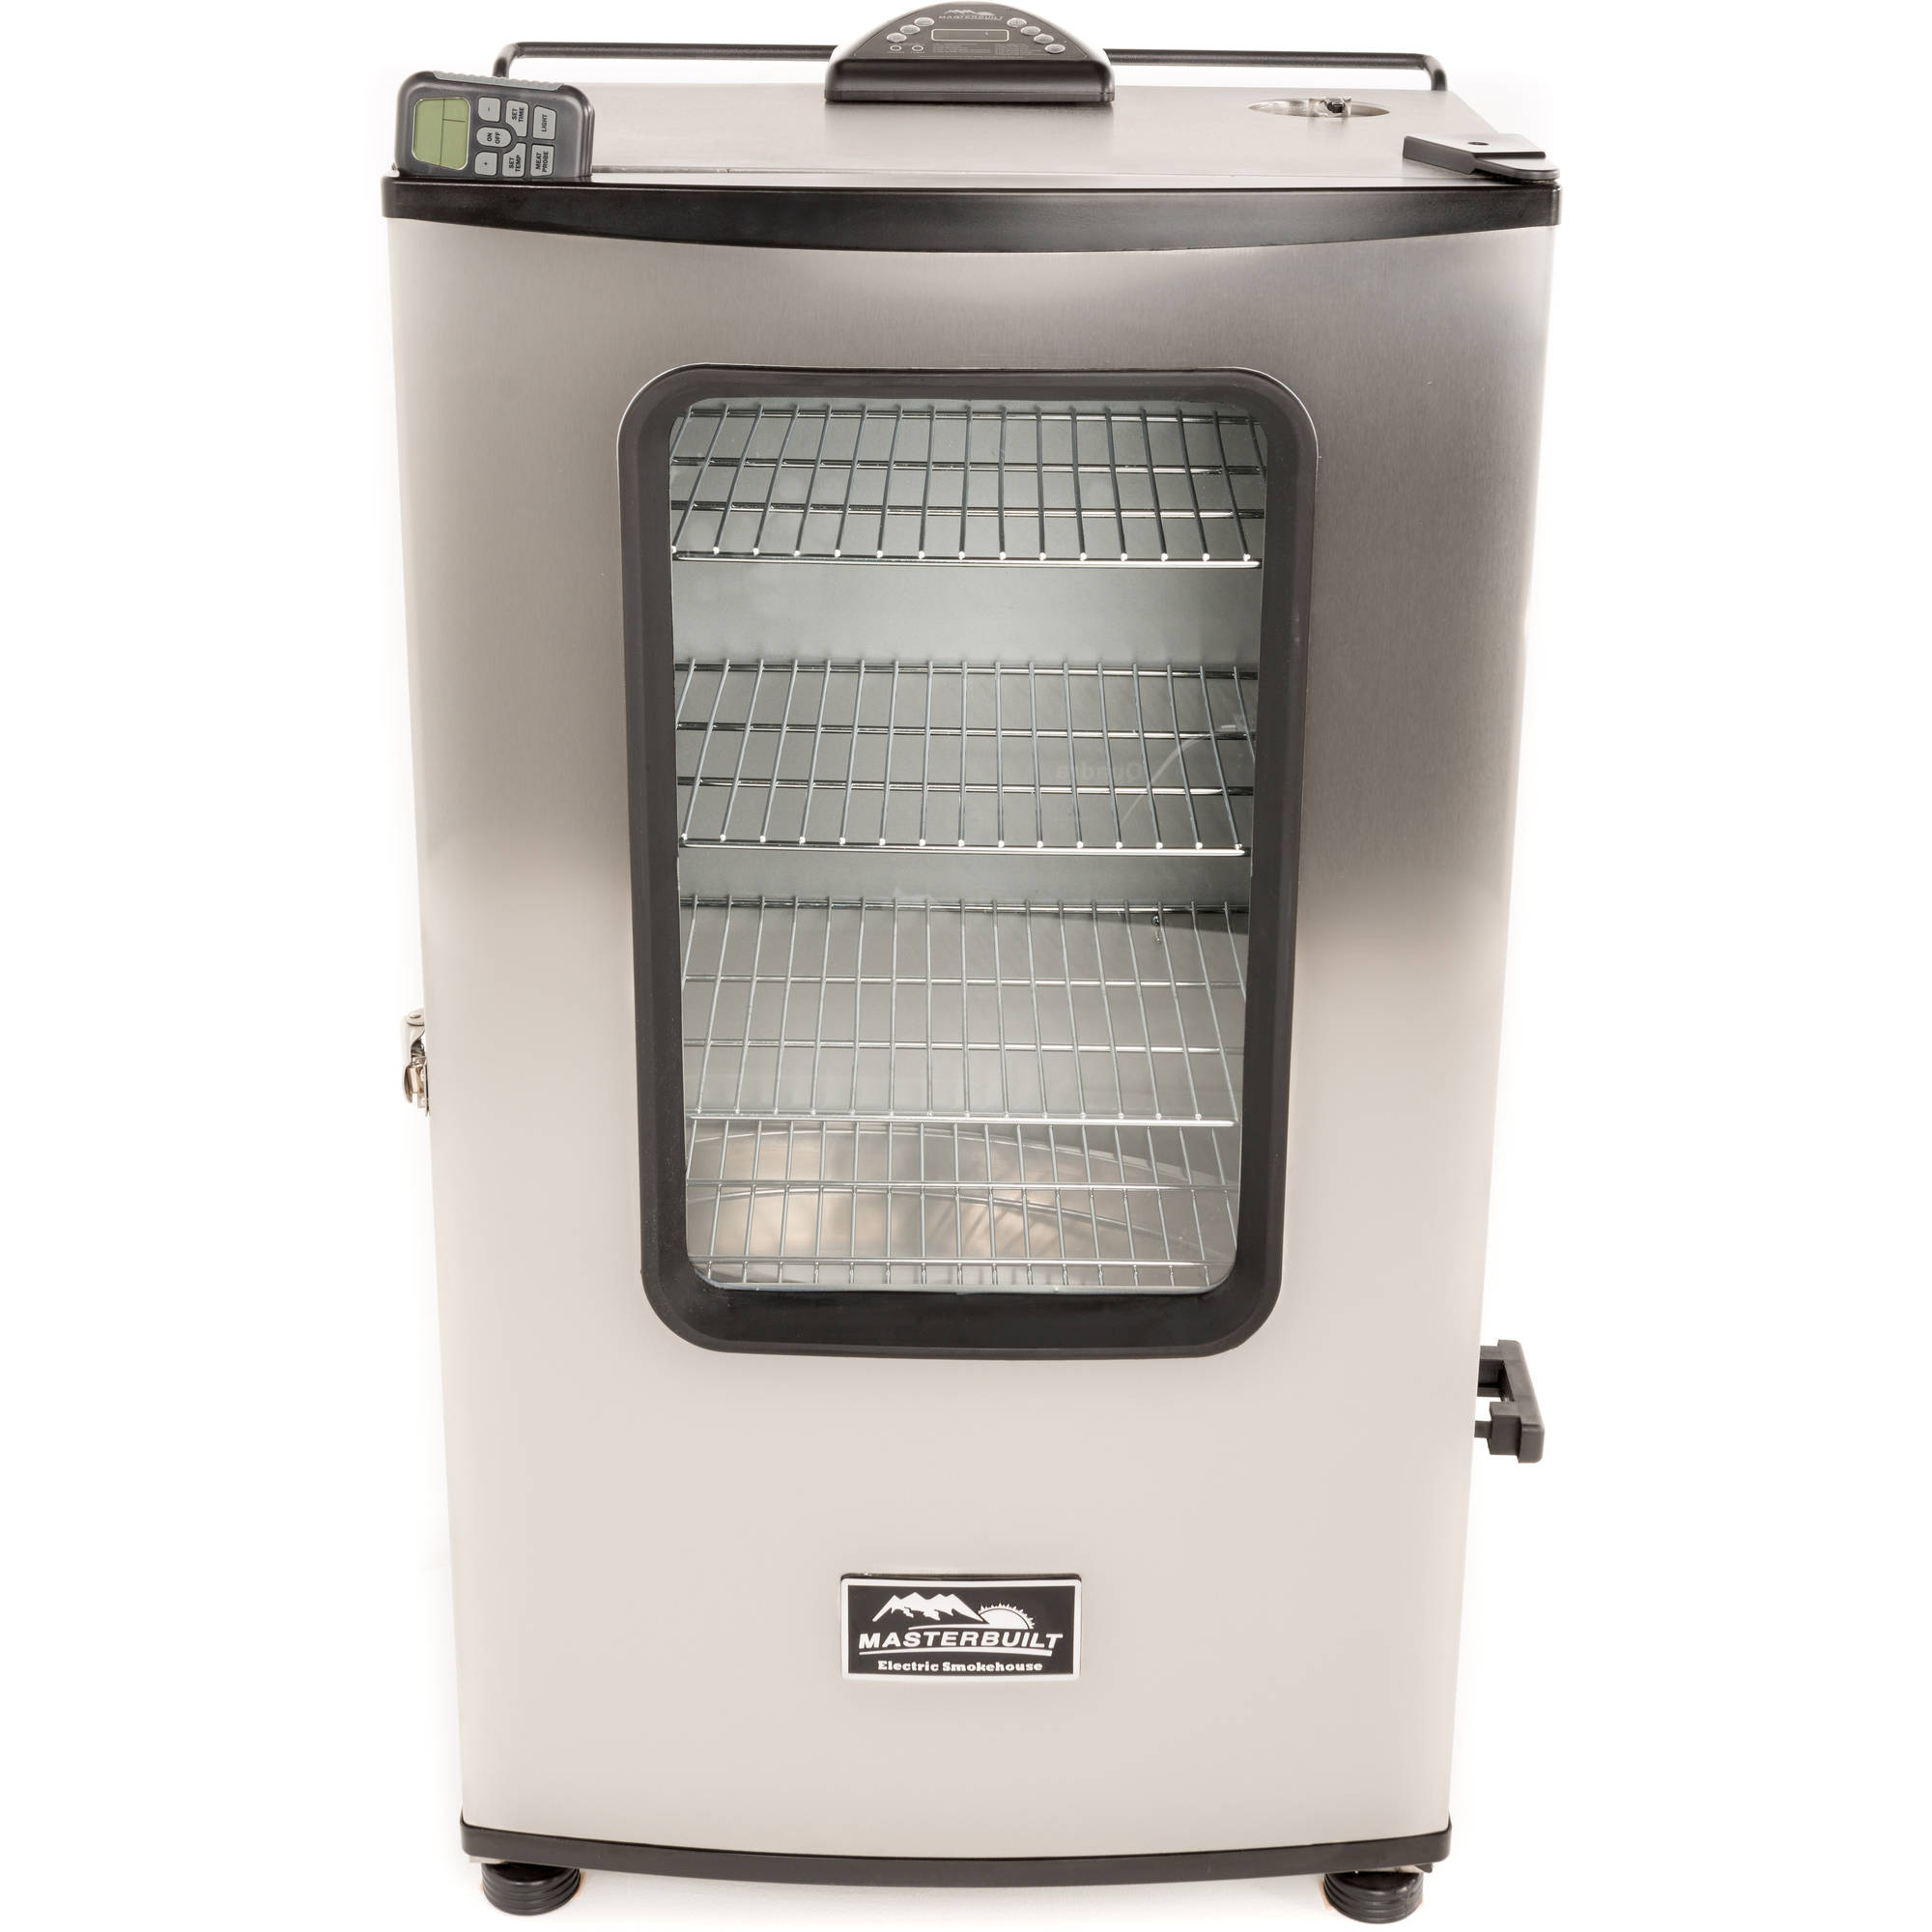 Masterbuilt 40" Electric Smoker with Window - image 1 of 3